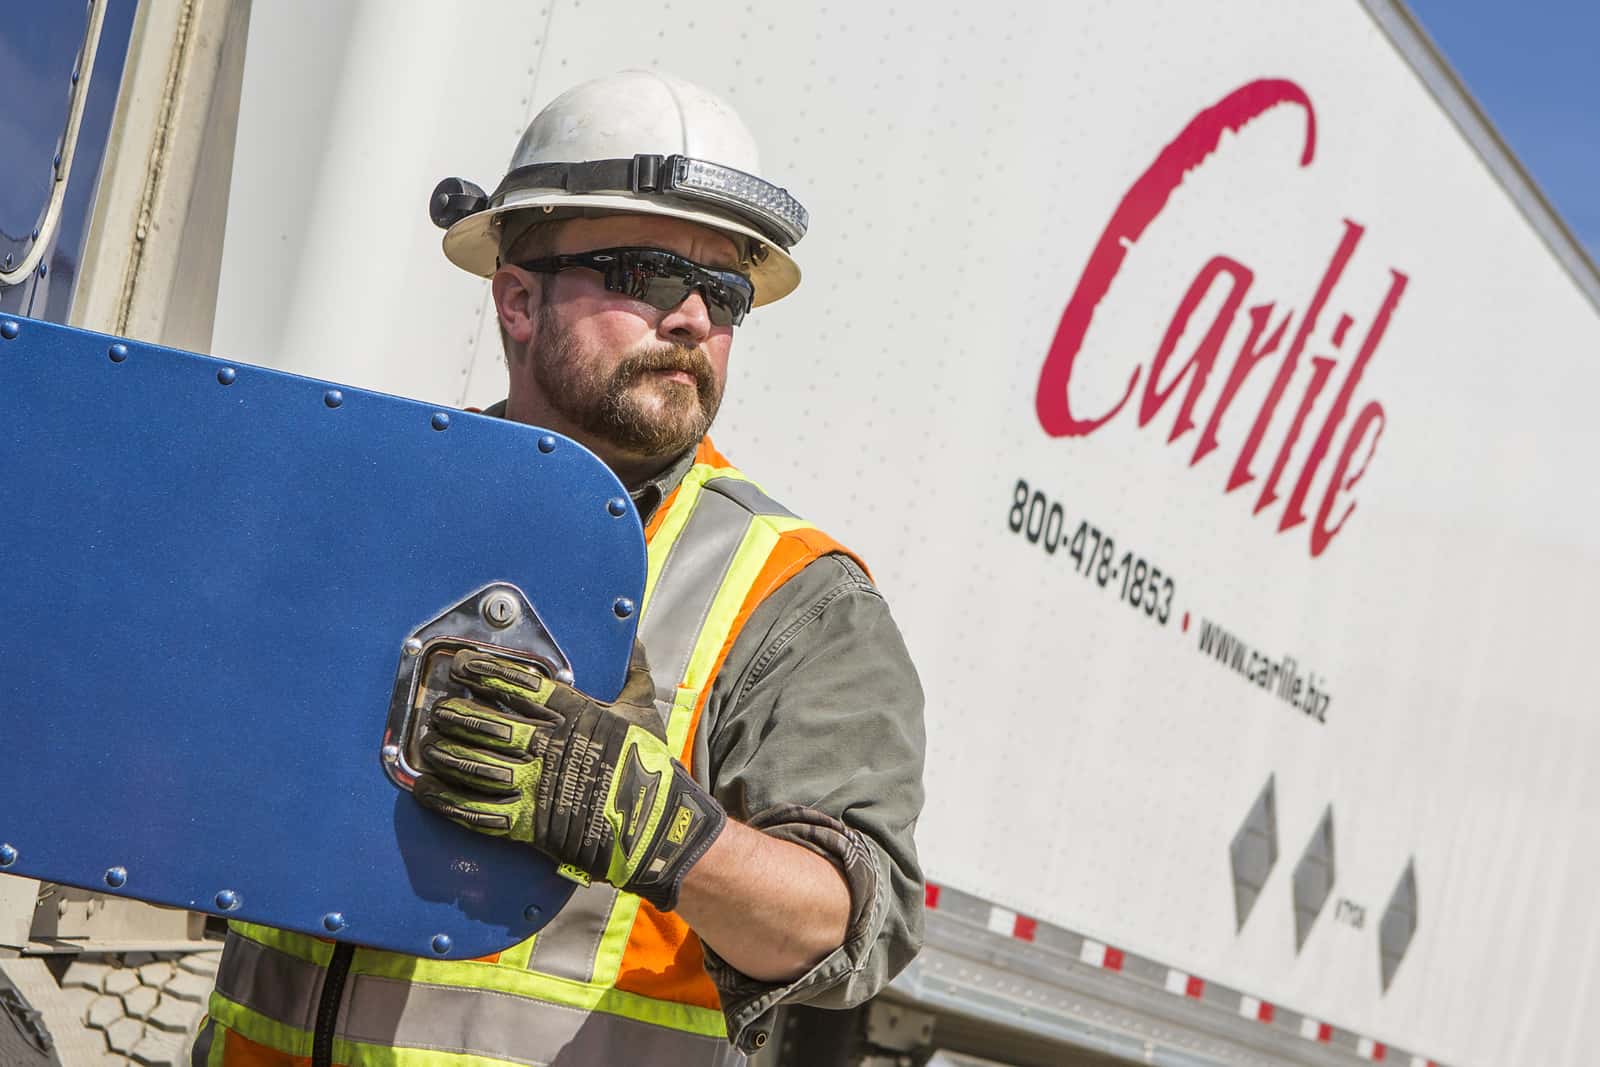 Eyth wearing a hardhat, sunglasses, safety vest, and thick gloves opens a compartment on his Carlile rig.